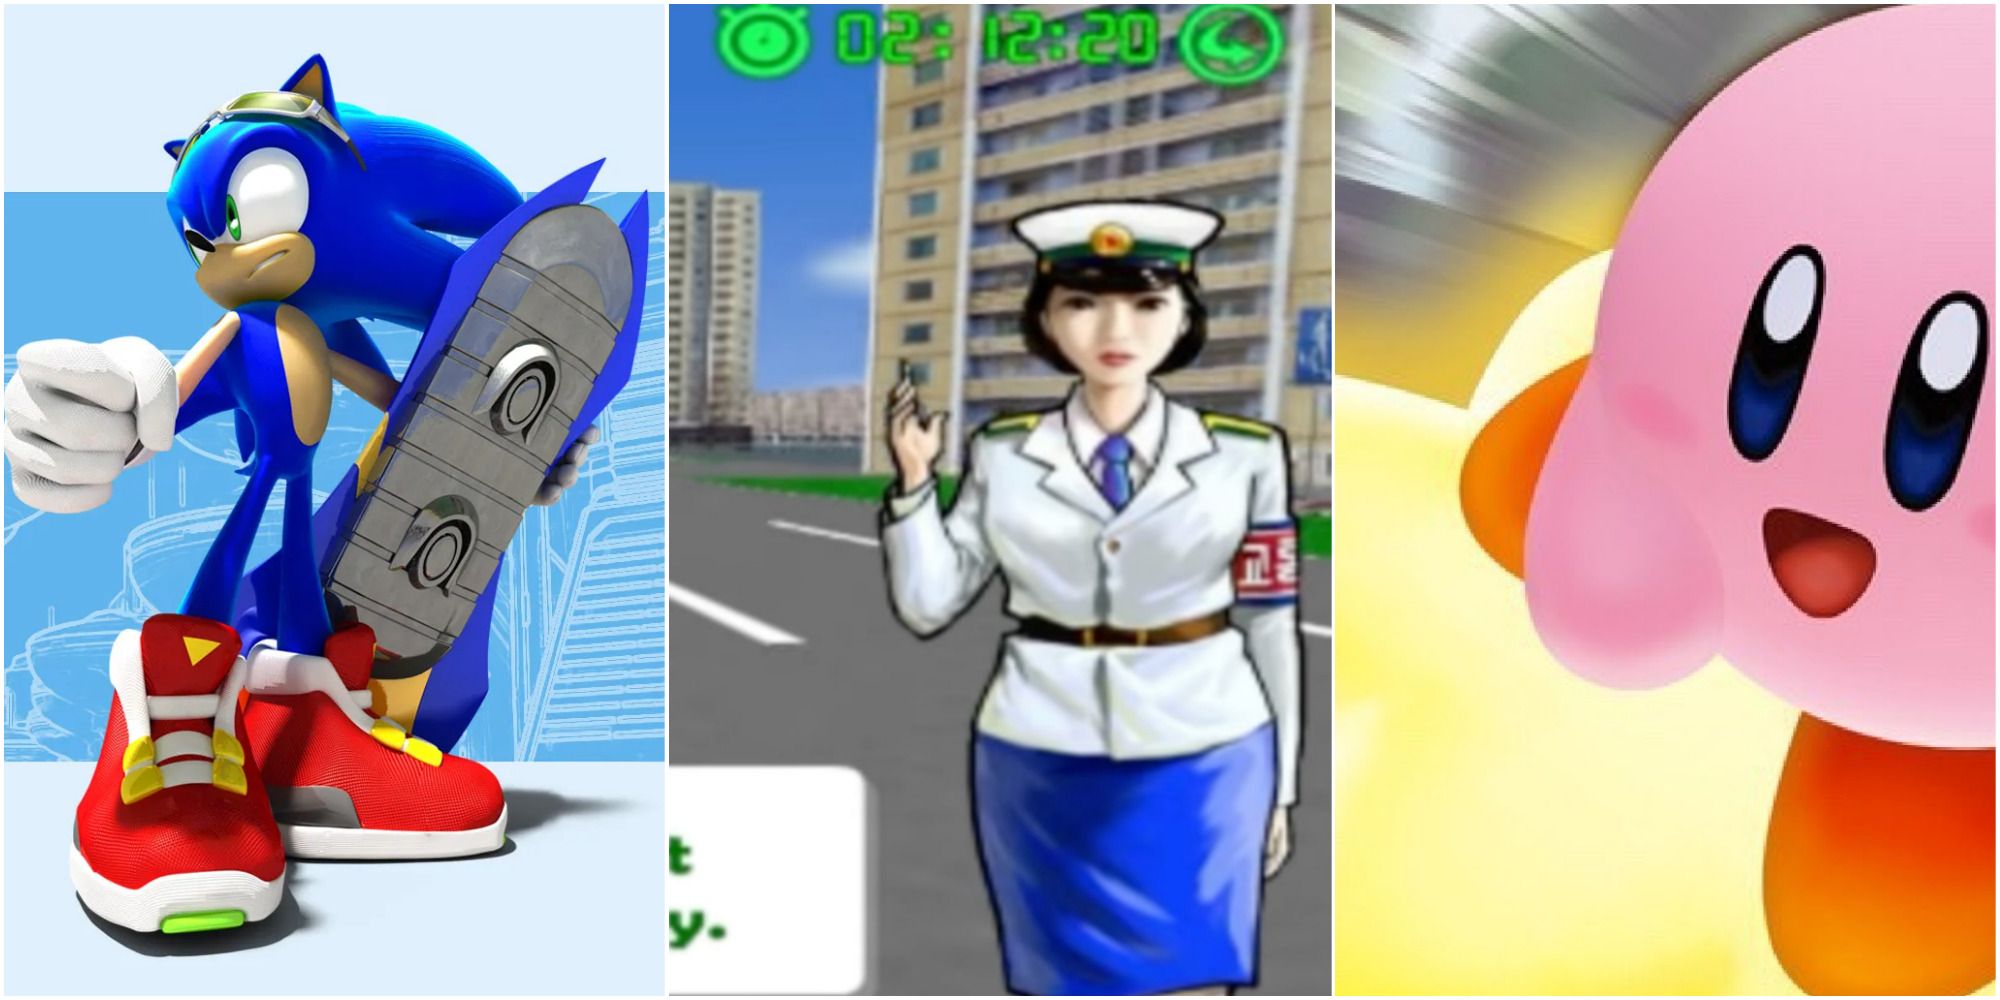 A collage of images from Sonic Riders, Pyongyang Racer, and Kirby's Air Ride